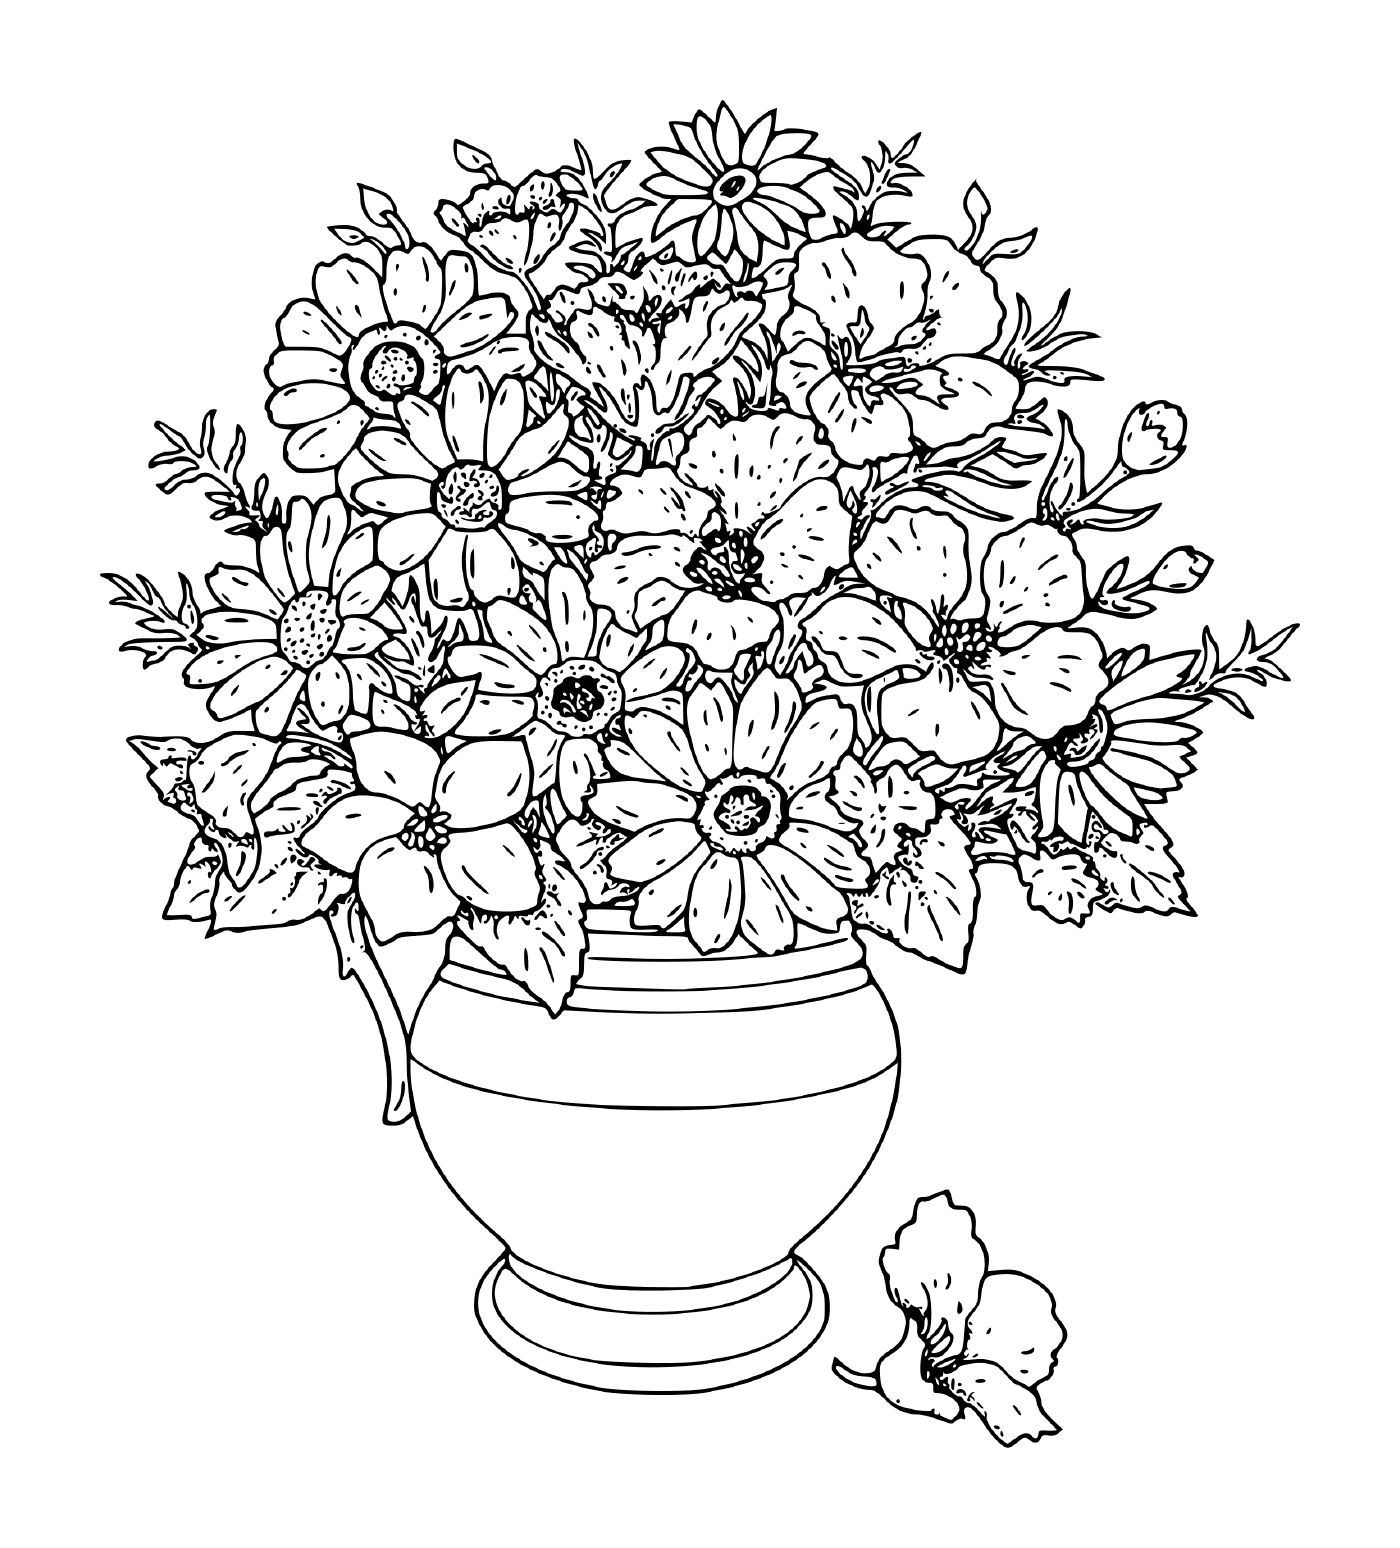  Flowers in a vase 